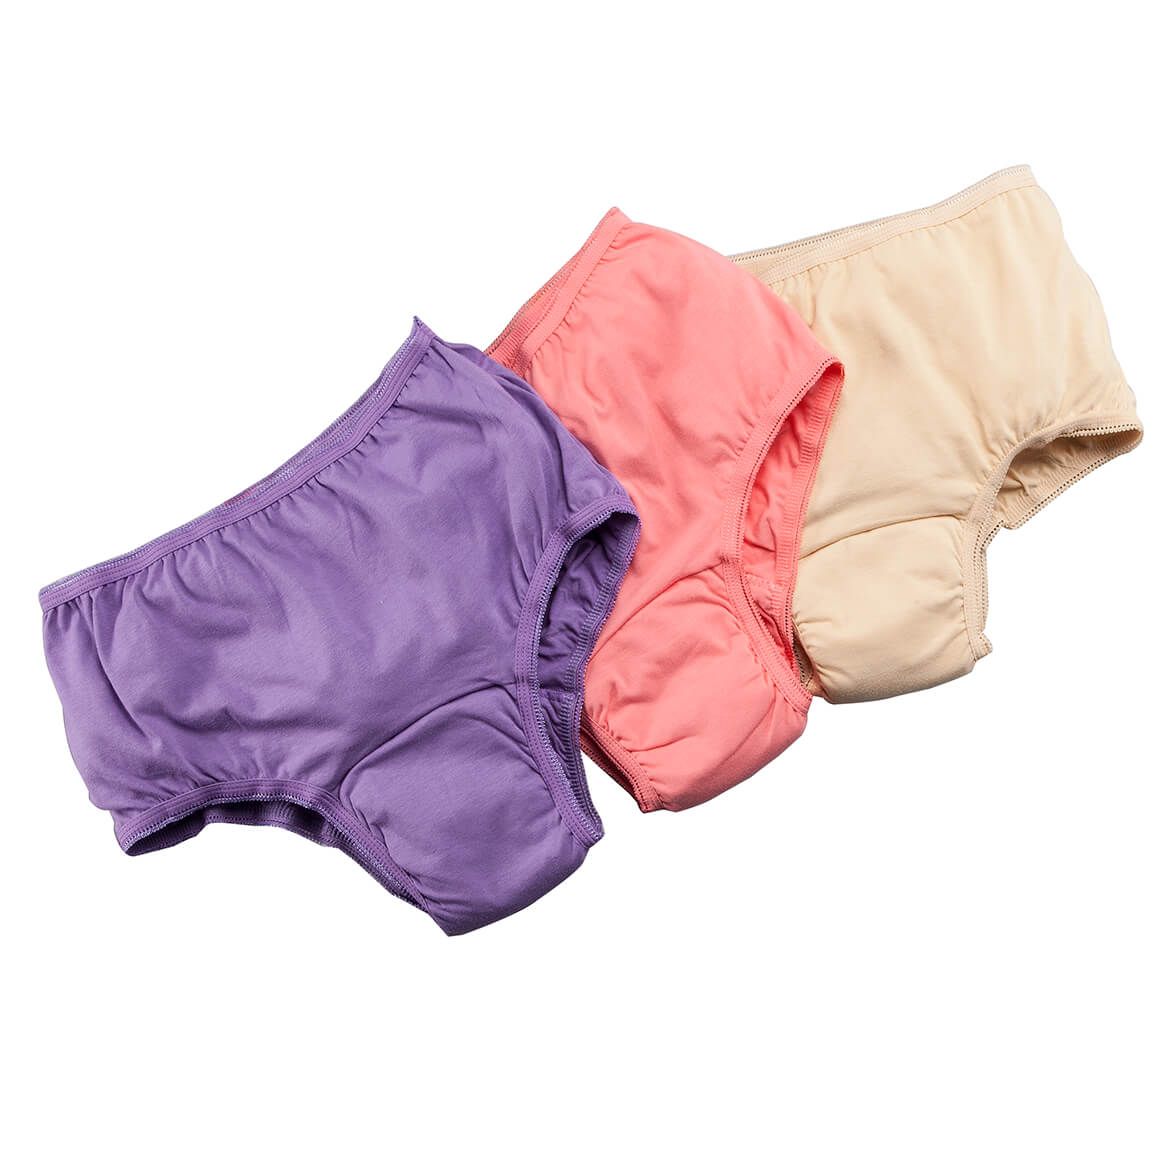 Women 20 oz. Incontinence Briefs –3-Pack Assorted colors + '-' + 362413